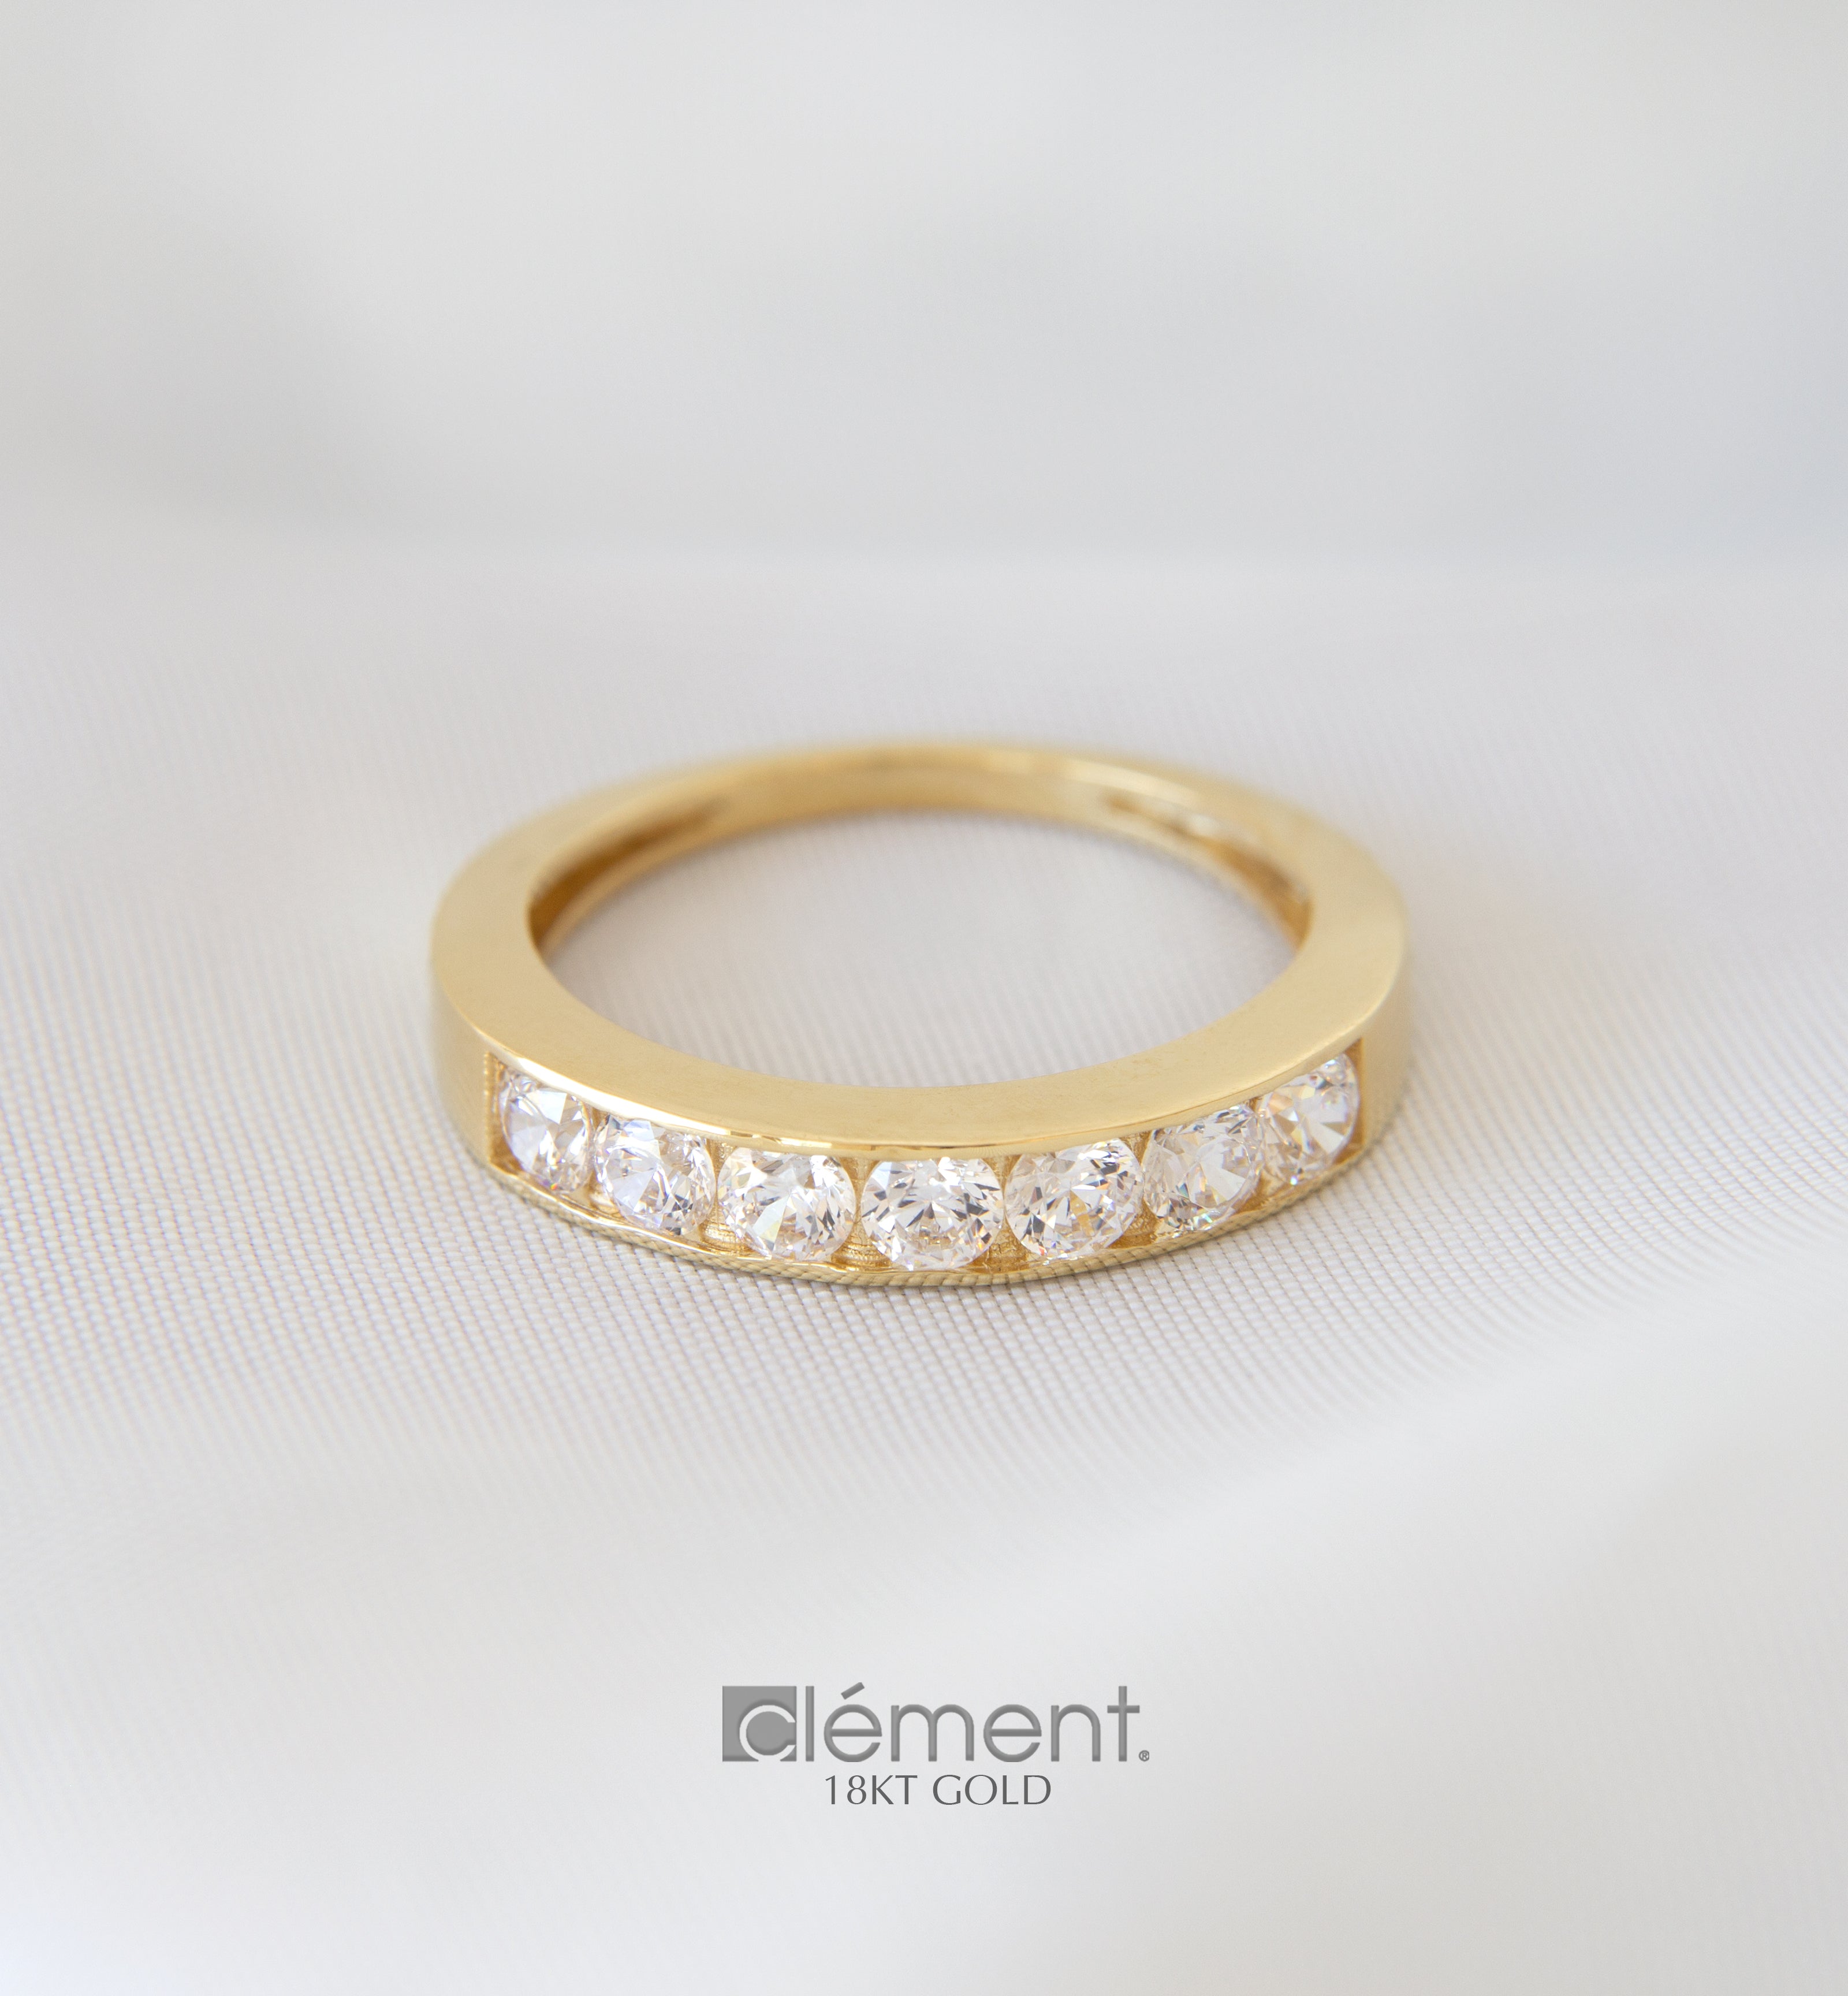 18ct Gold Ring with CZ Stones